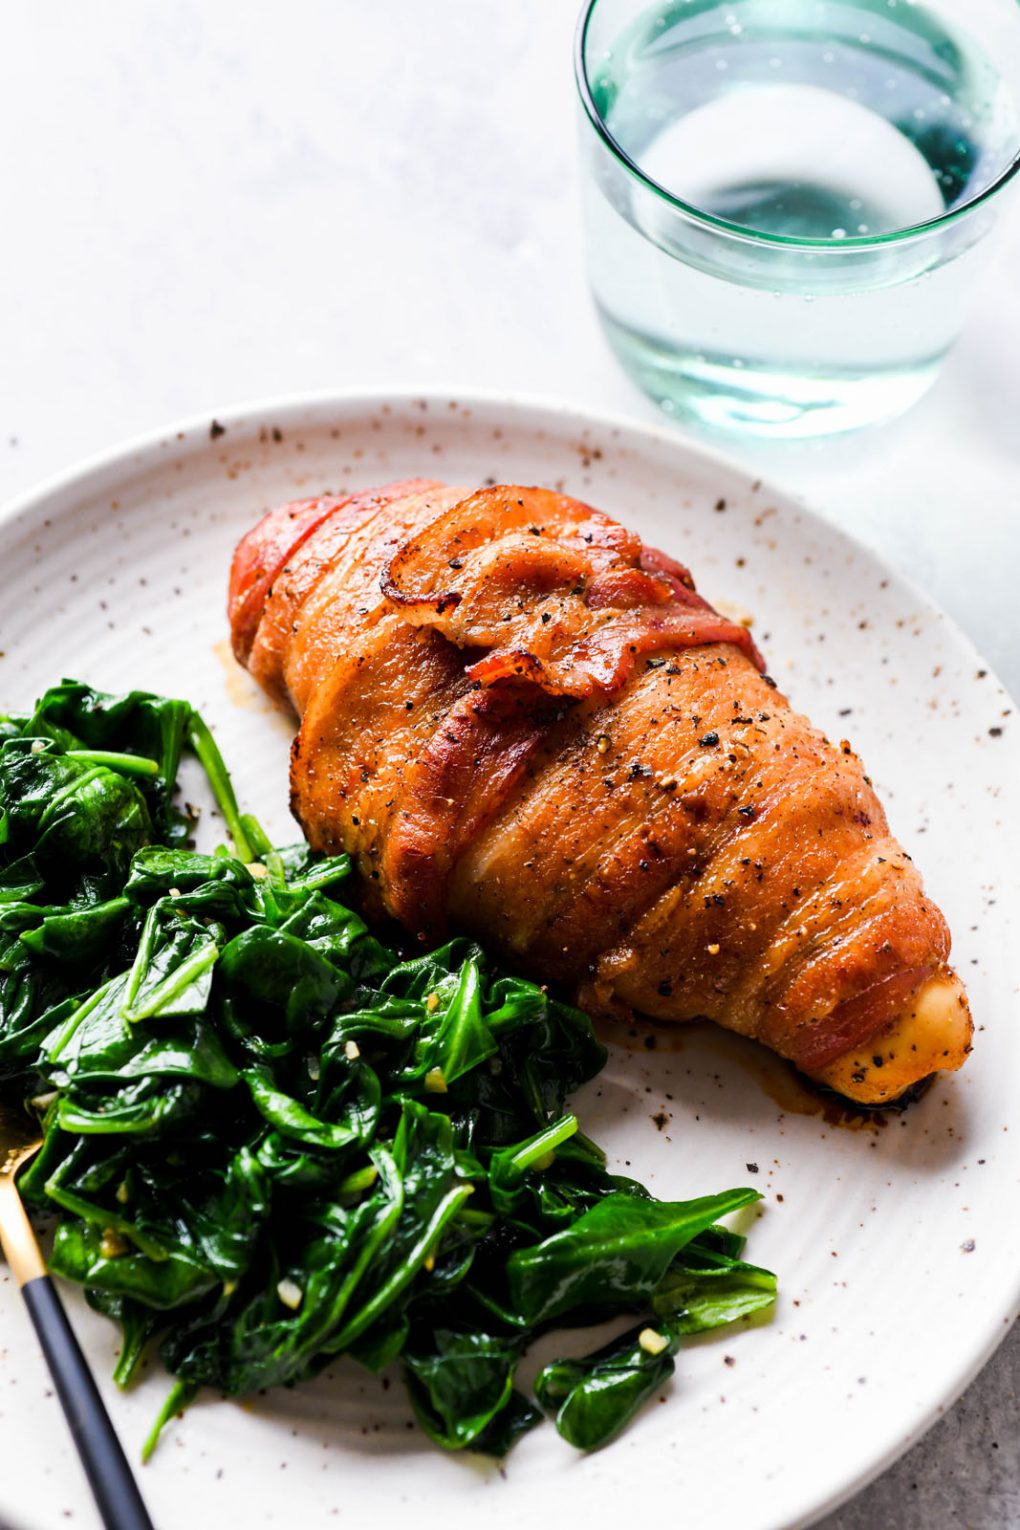 45 degree angle shot of a golden brown baked bacon wrapped chicken breast on a white speckled plate, next to a generous portion of wilted spinach with garlic. On a light colored background next to a light green glass with sparkling water. 